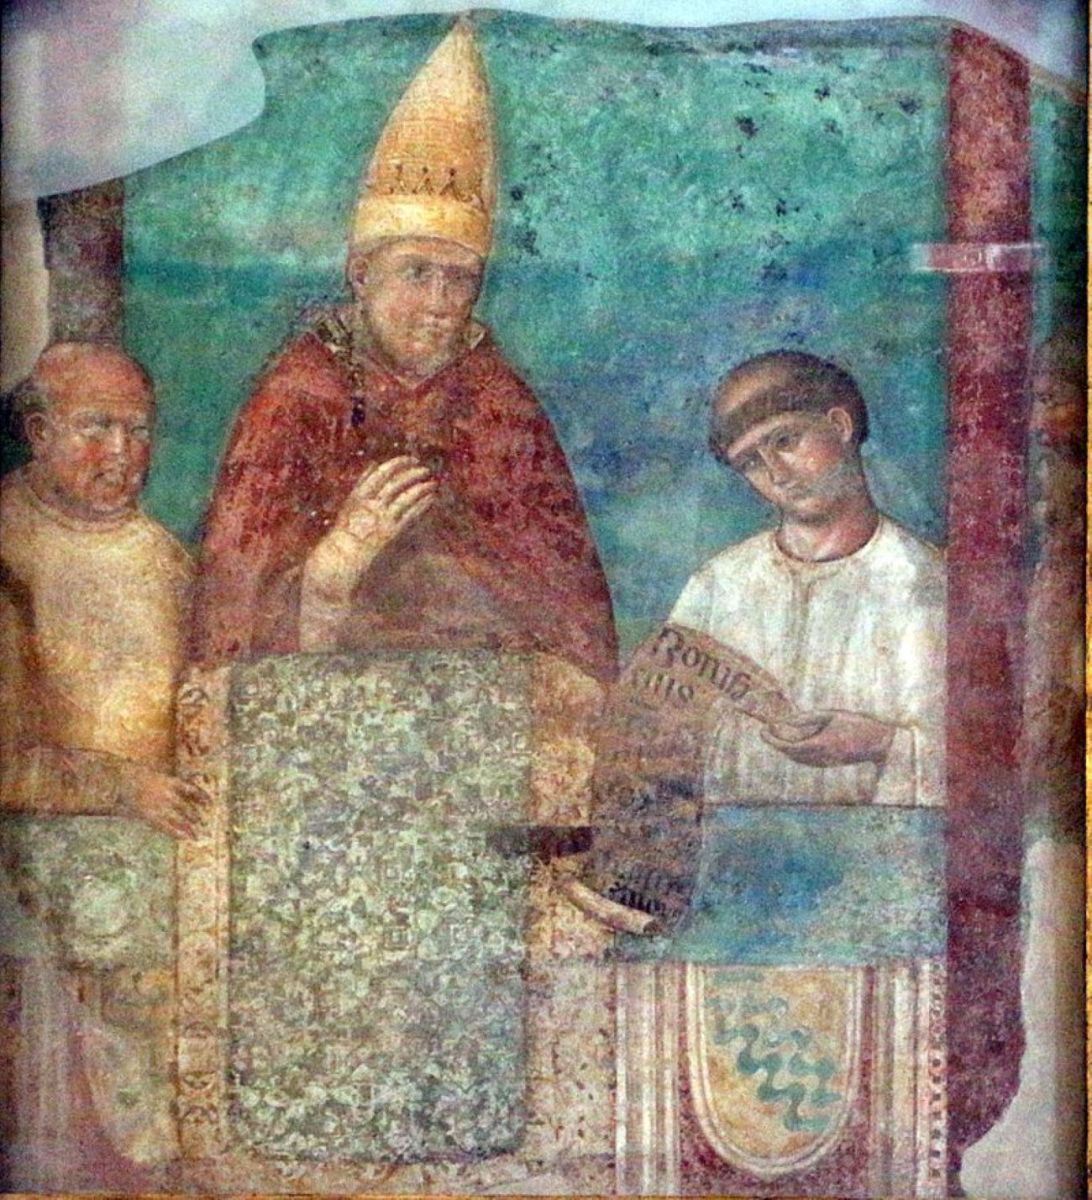 Pope Boniface VIII. His dispute with King Philip IV of France led to John Duns Scotus being expelled from France.